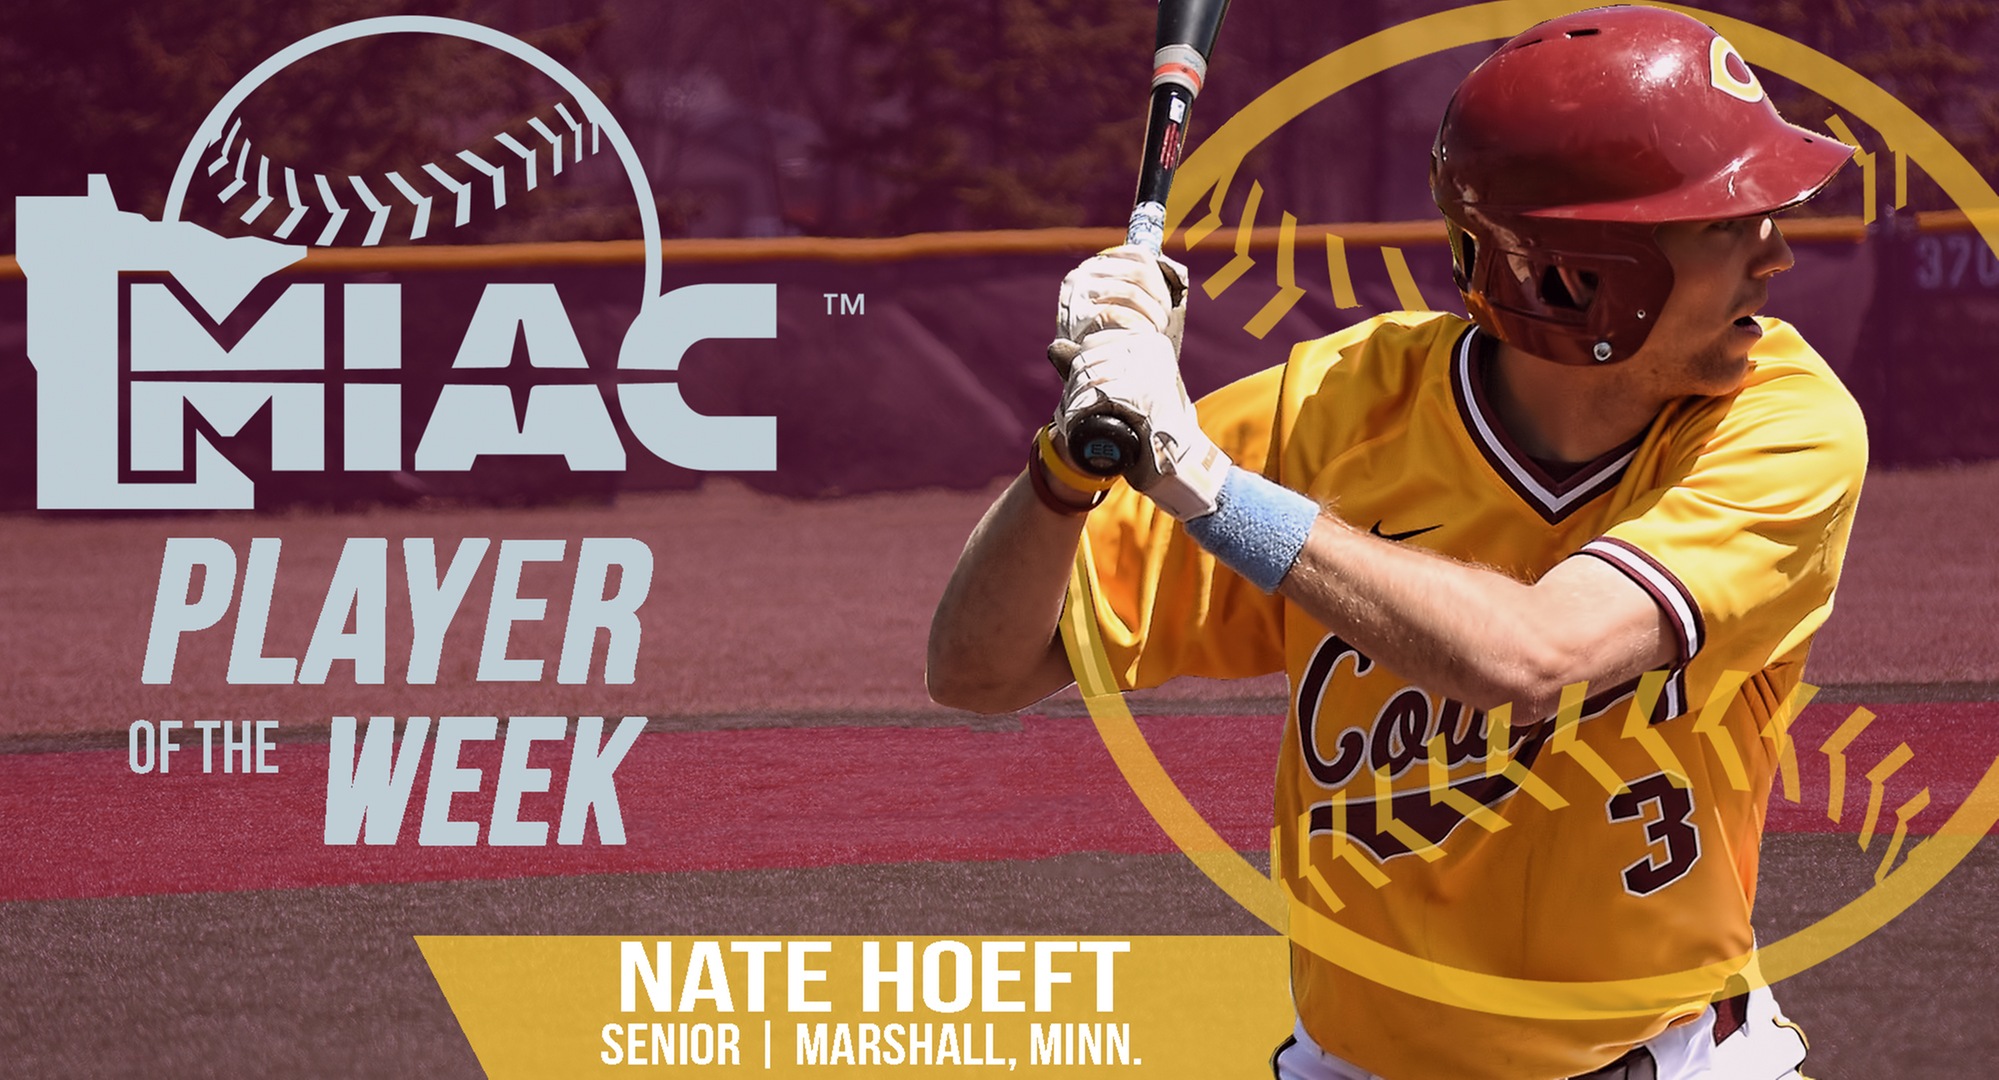 Senior Nate Hoeft earned his first-ever MIAC Player of the Week honor after hitting .526 in his first five games of the year.